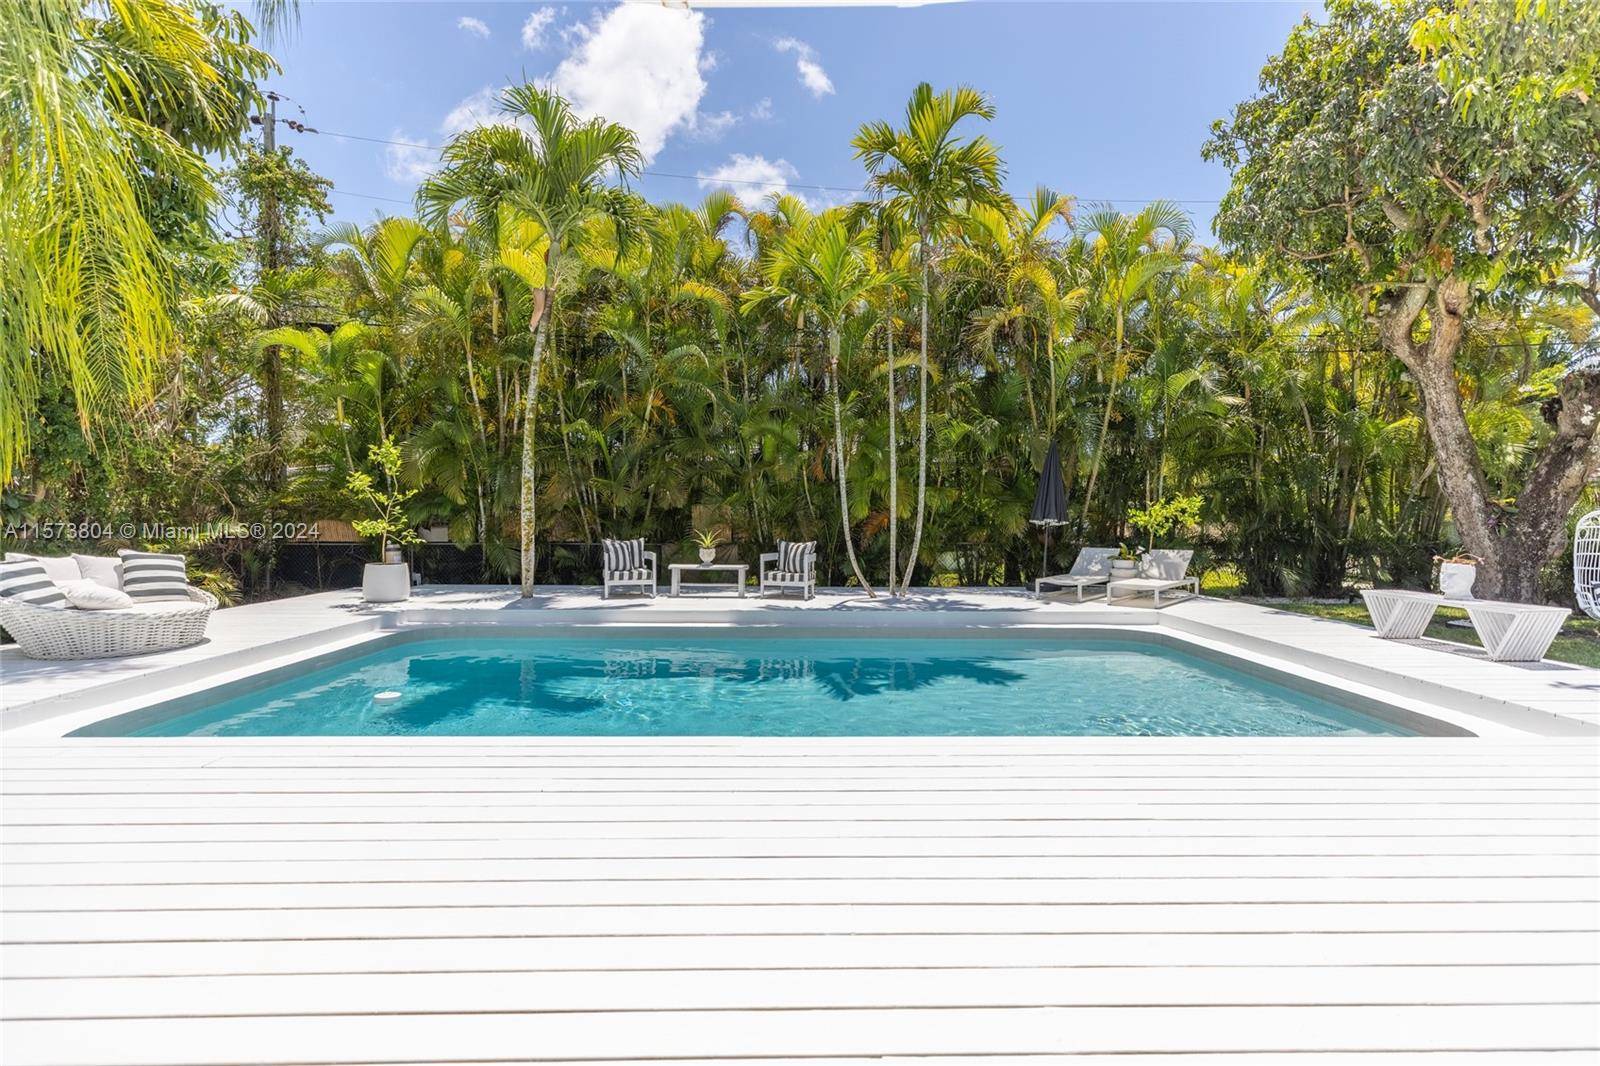 Key West style home situated in the picturesque surroundings of Miami Shores.